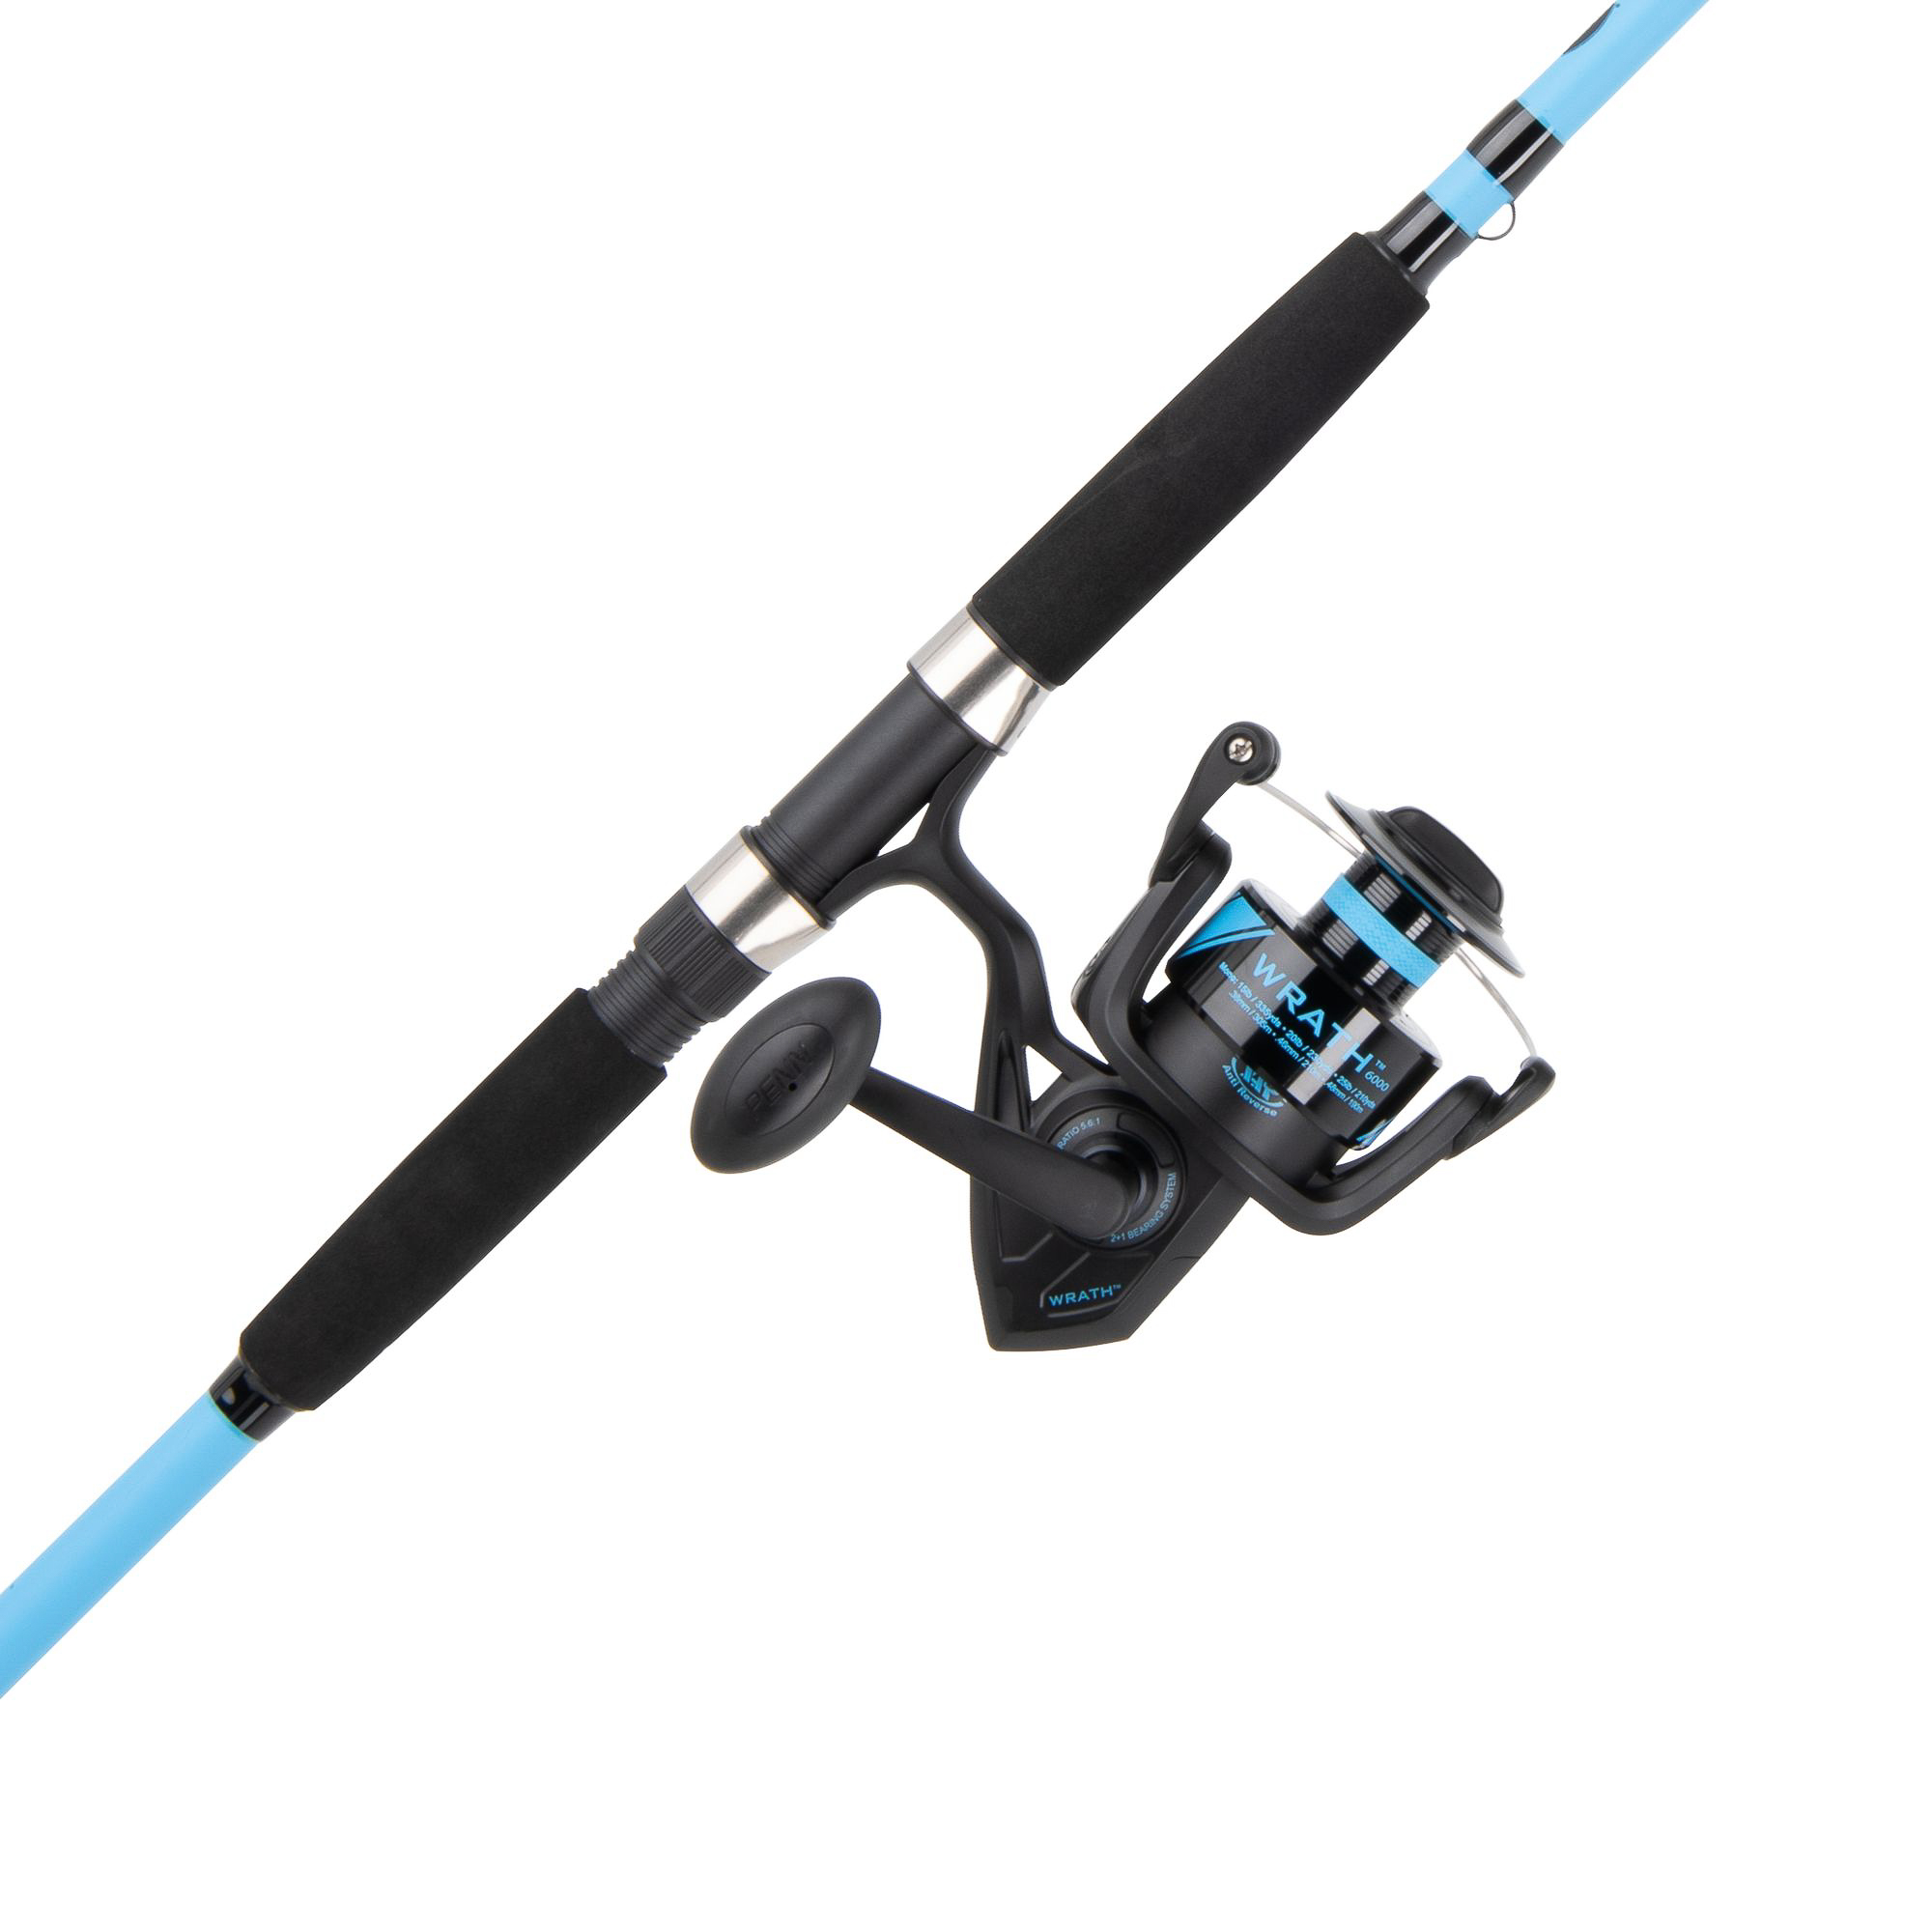 PENN 9 Ft. Wrath Fishing Rod and Reel Spinning Combo - image 1 of 5